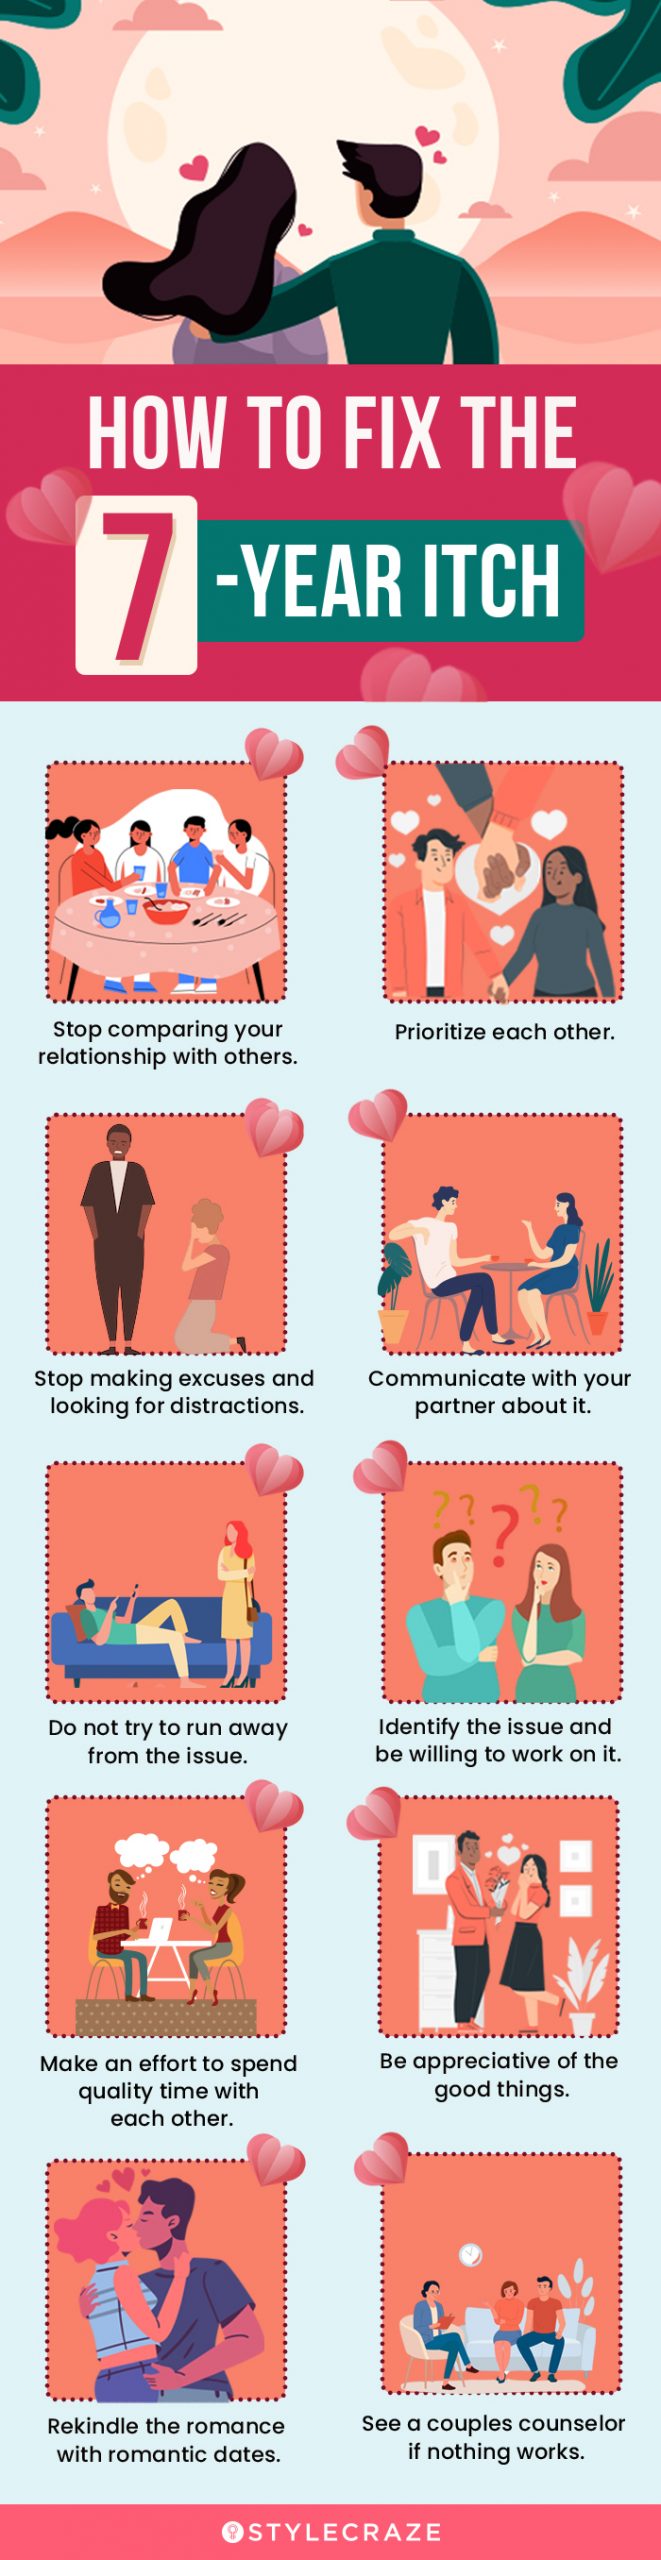 how to fix 7 year itch (infographic)